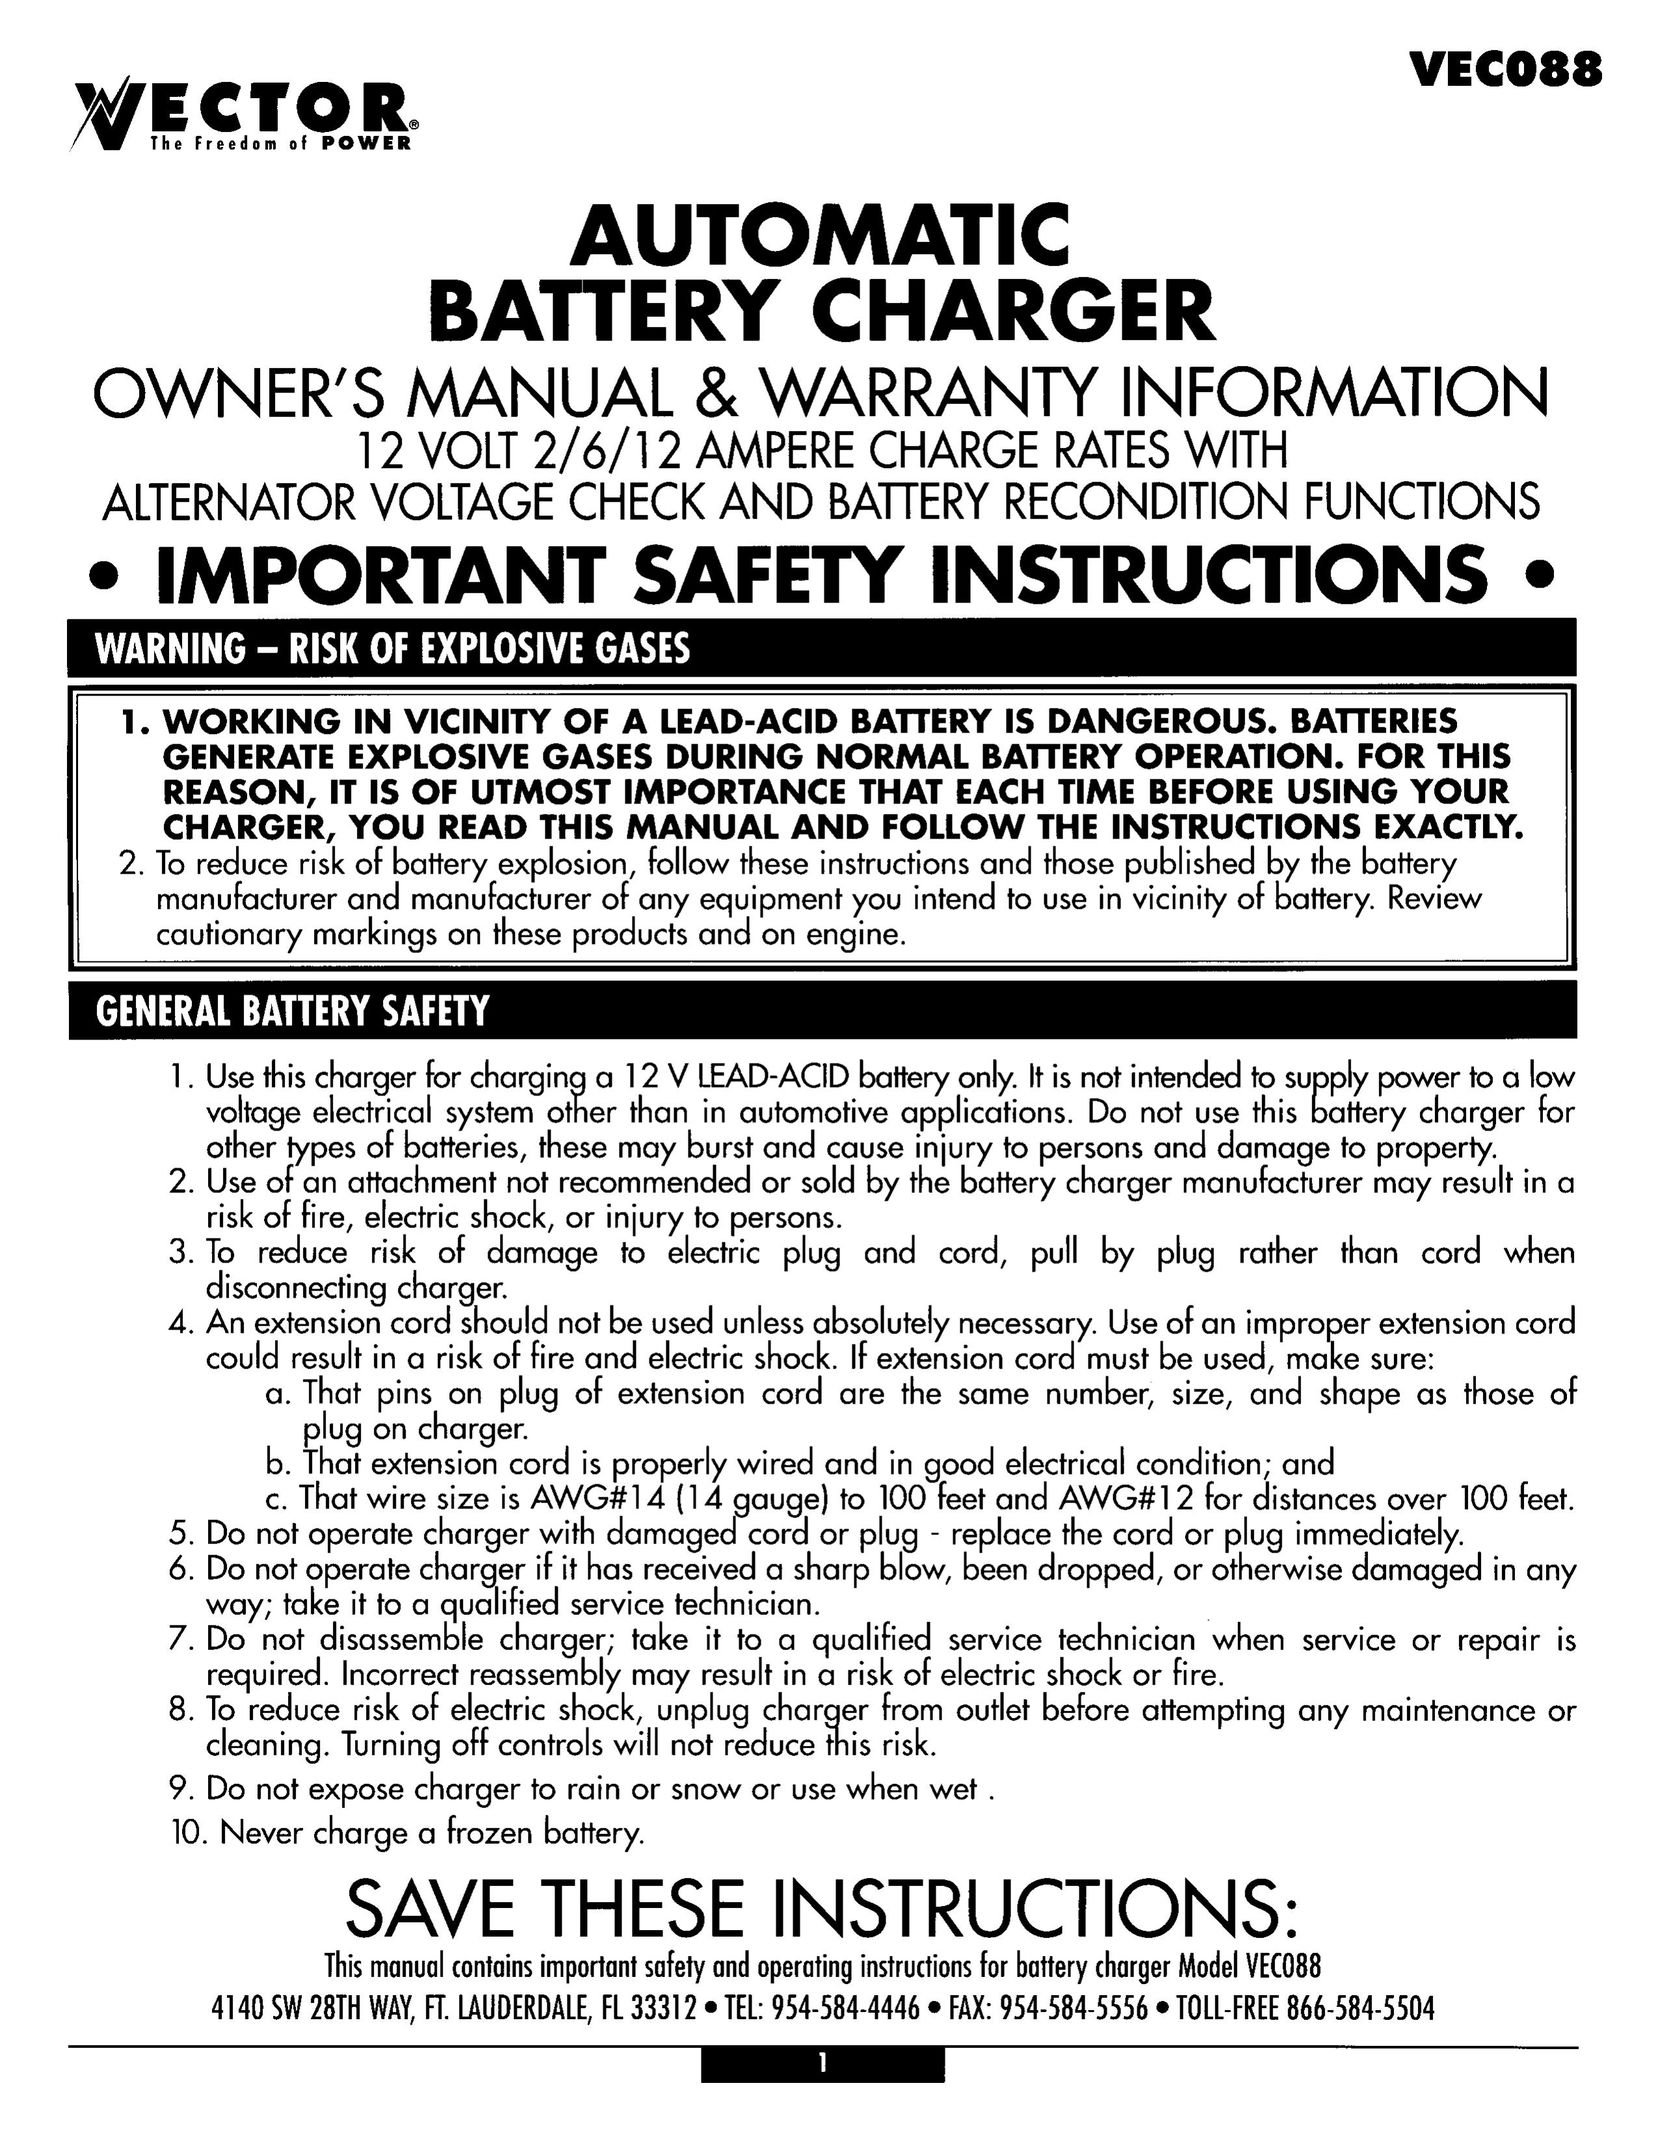 Vector VEC088 Battery Charger User Manual